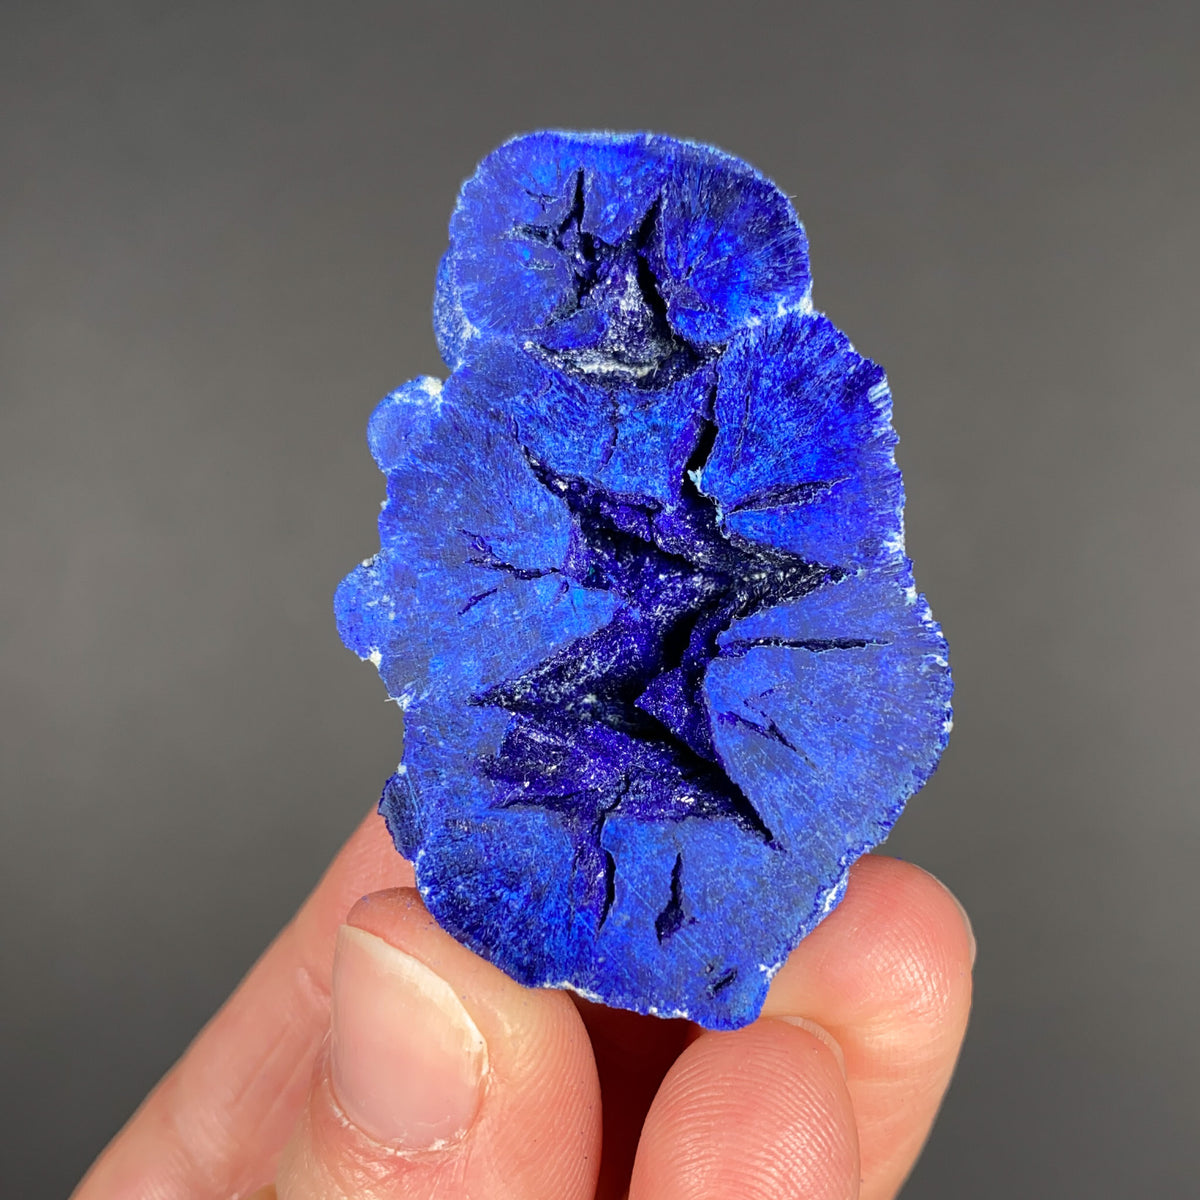 Interior of an Azurite Nodule with Crystals Inside